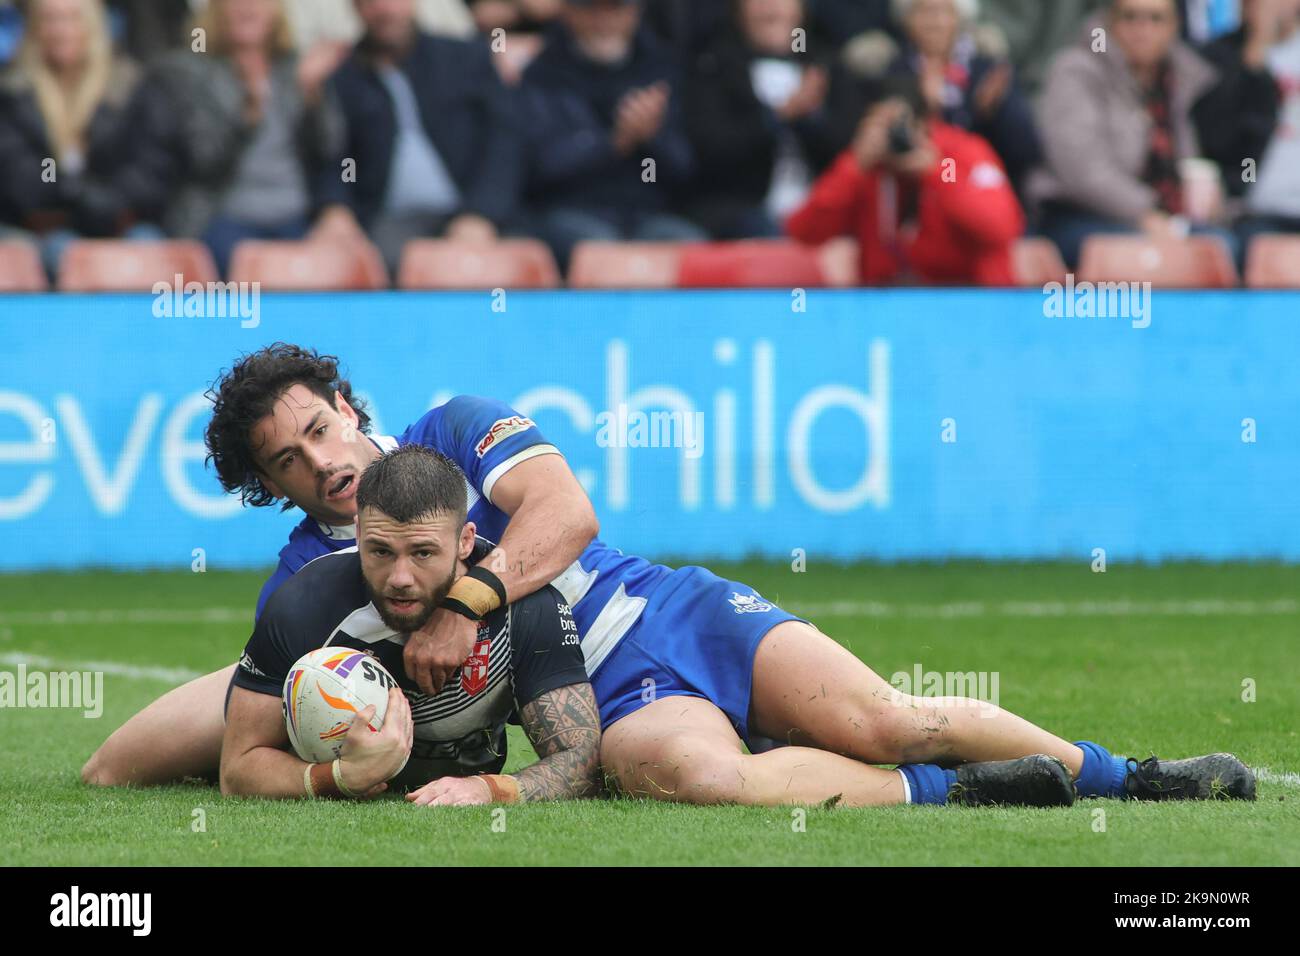 Sheffield, UK. 29th Oct, 2022. Bramall Lane, Sheffield, South Yorkshire, 29th October 2022. Rugby League 2021 World Cup England Rugby League vs Greek Rugby League Andy Ackers of England Rugby League scores the try against Greece Rugby League Credit: Touchlinepics/Alamy Live News Stock Photo